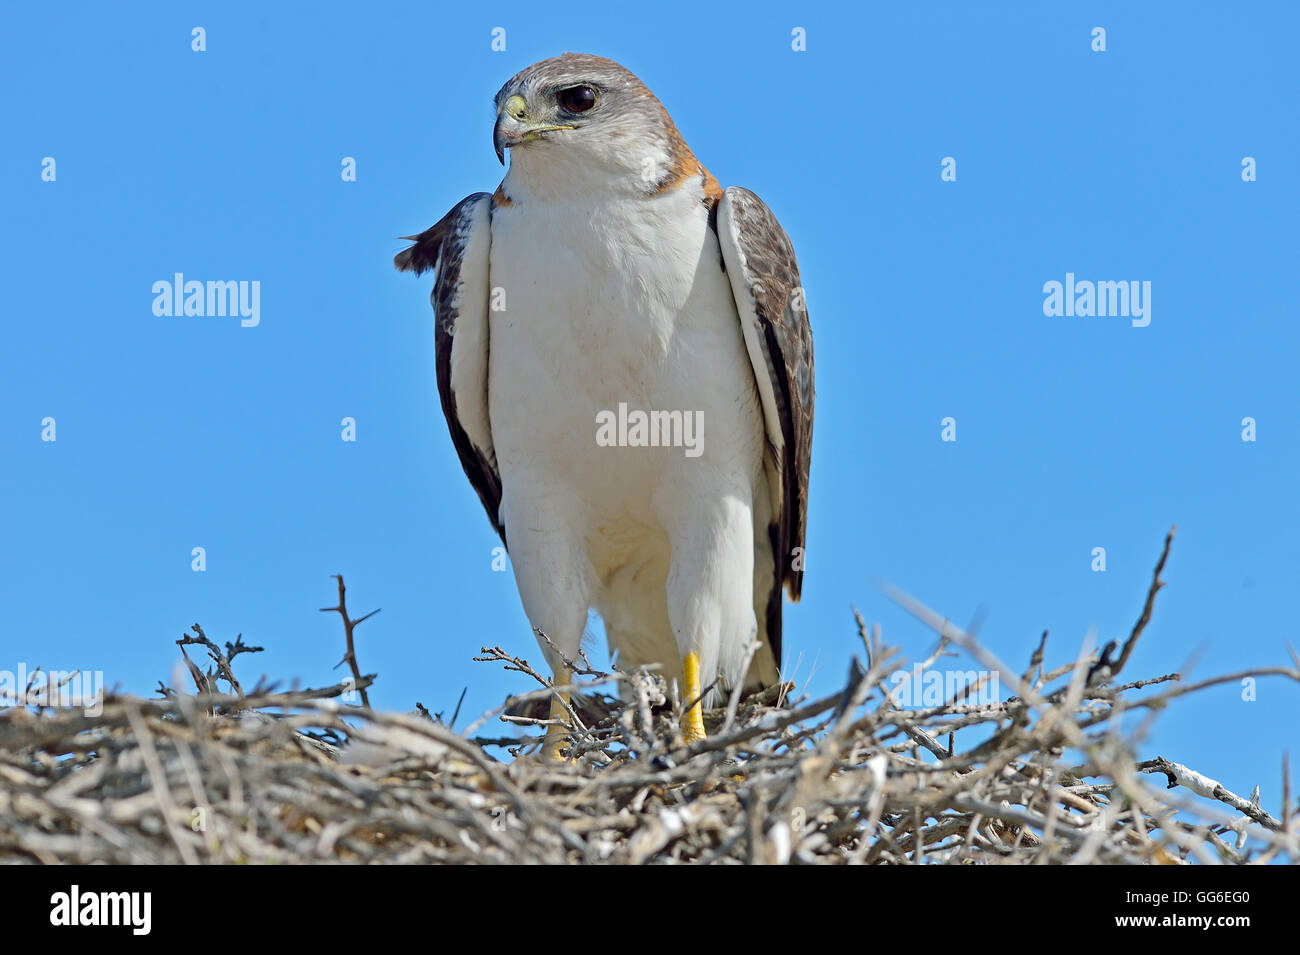 Red backed hawk (Buteo Polyosoma) with her chick on the nest, Peninsula Valdes, Patagonia, Argentina, South America Stock Photo